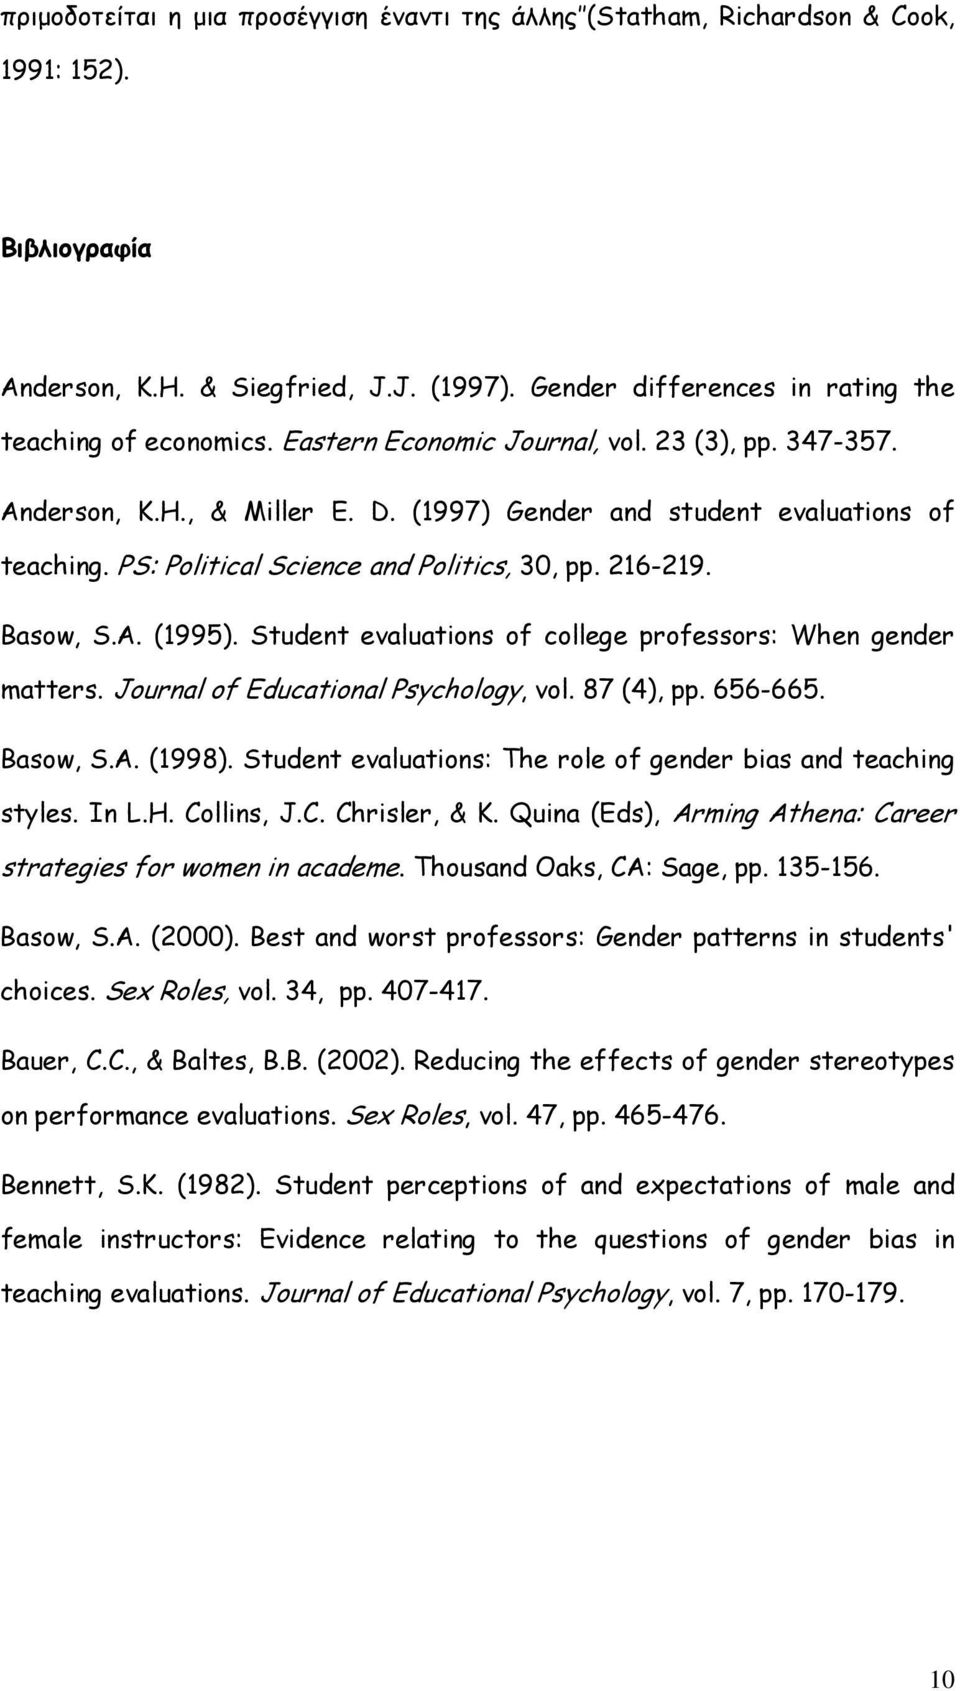 Student evaluations of college professors: When gender matters. Journal of Educational Psychology, vol. 87 (4), pp. 656-665. Basow, S.A. (1998).